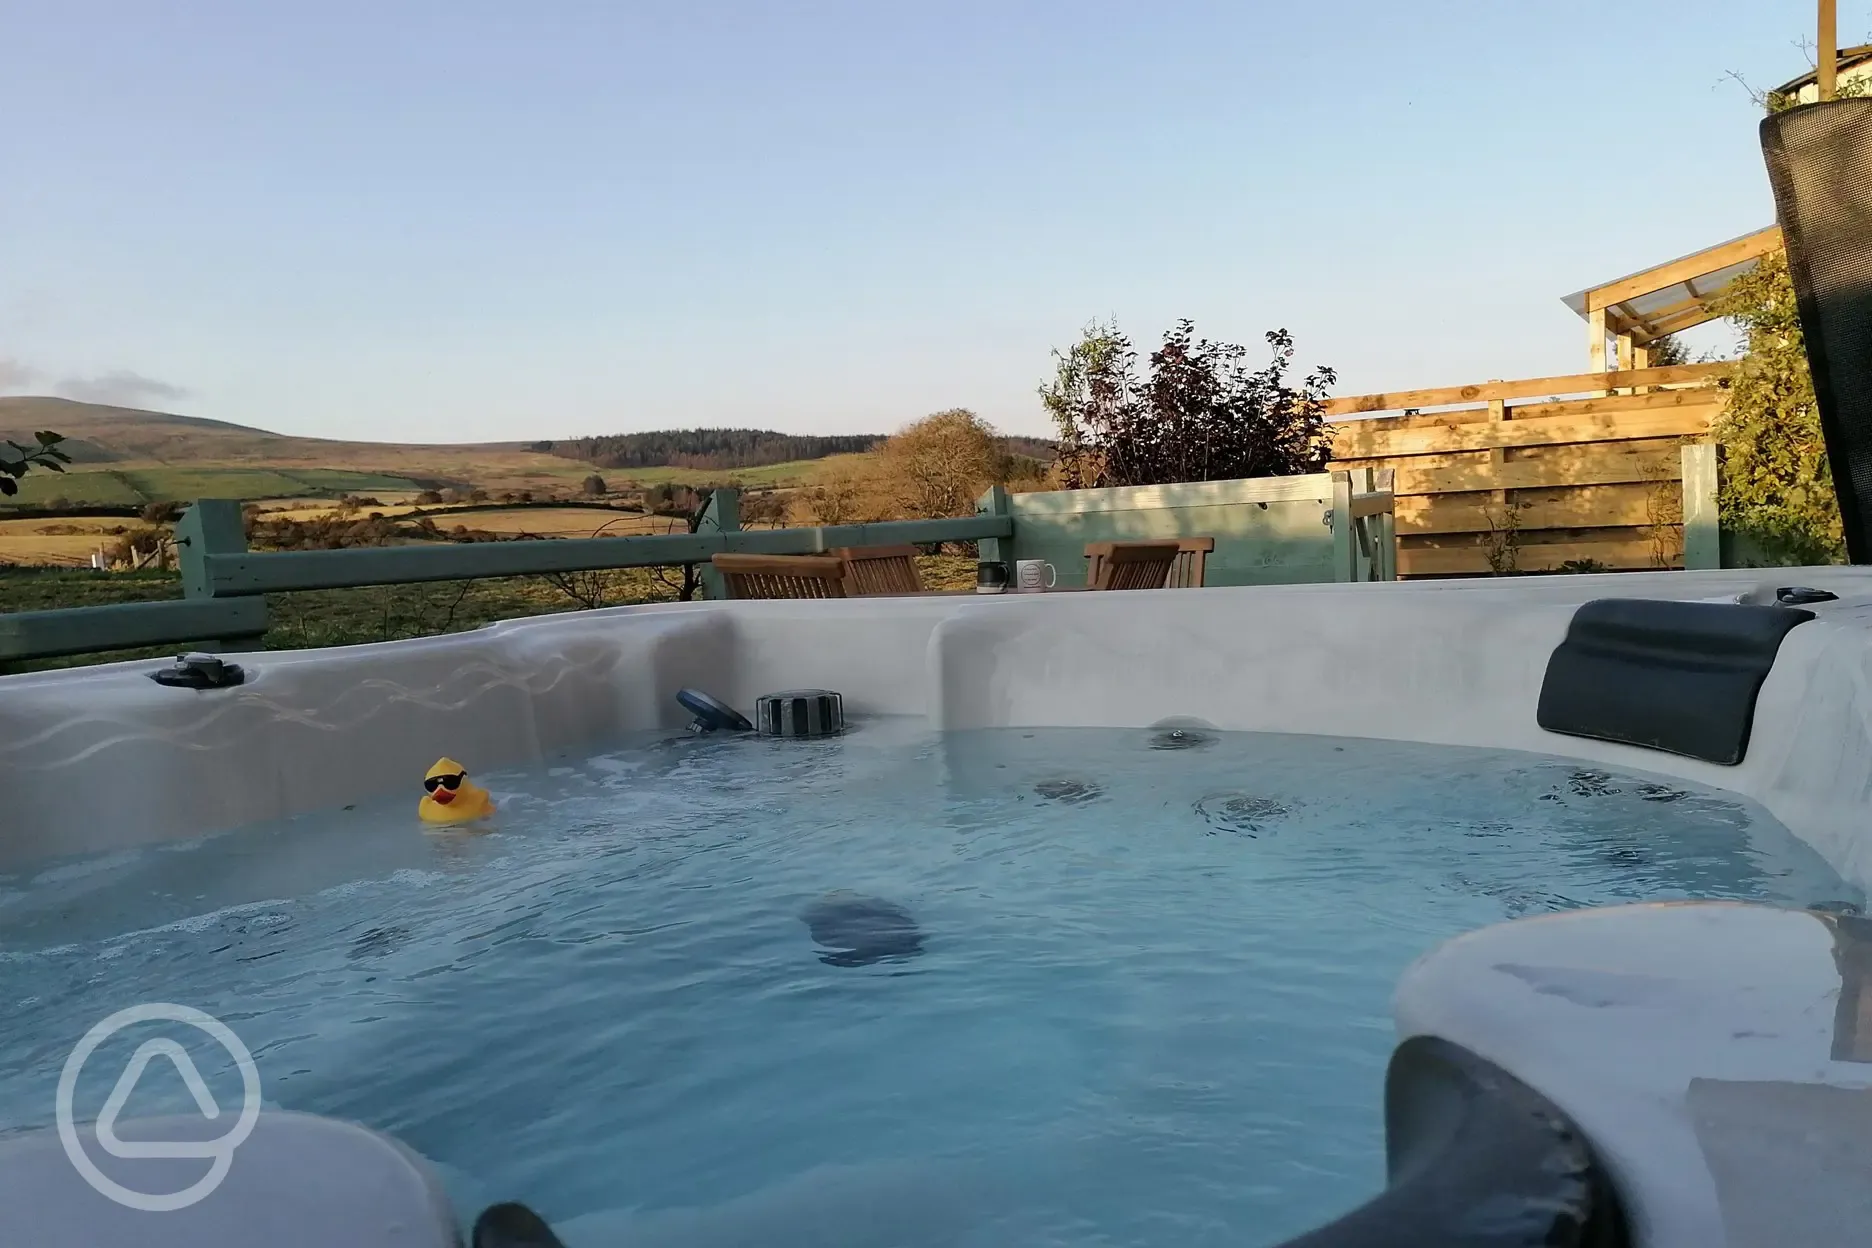 Hot tub waiting - if you are in Hedgerow hut